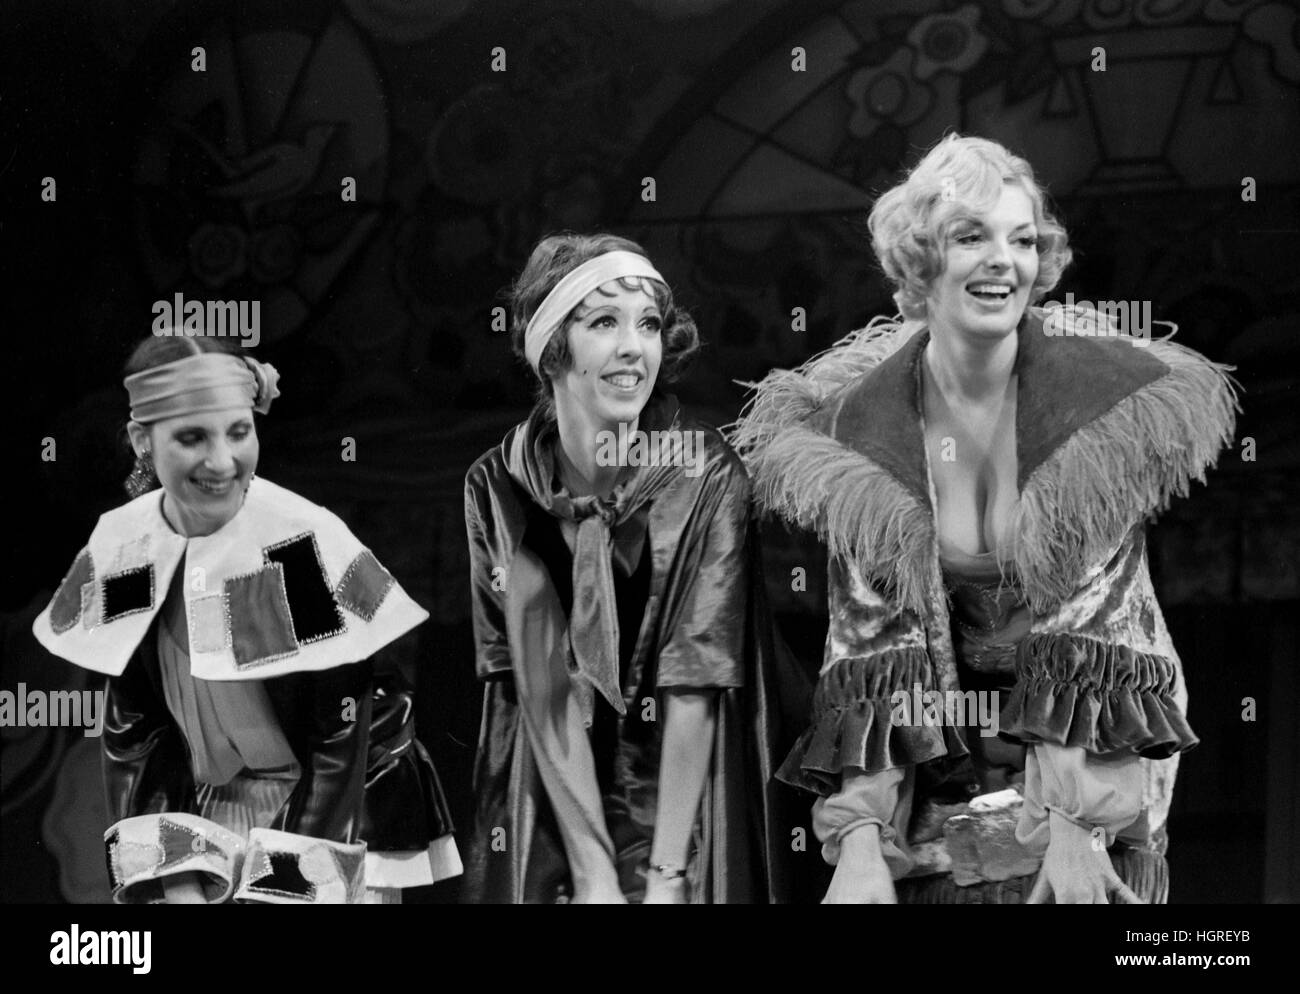 K.C. Townsend on the right, and Pat Lysinger in the middle, in the 1971 production of No No Nanette. The dancer on the left is unidentified. Stock Photo